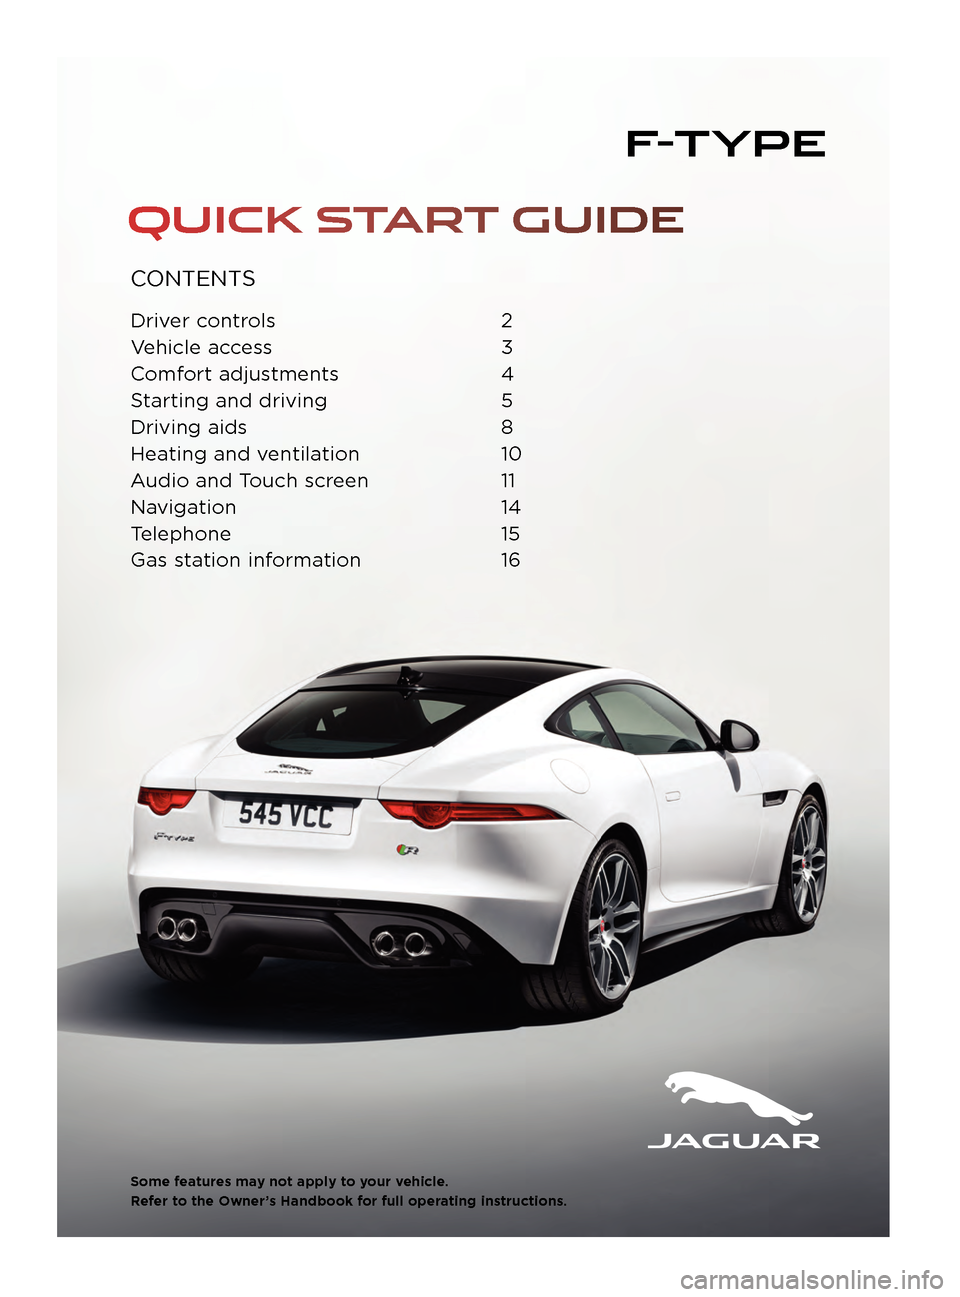 JAGUAR F TYPE 2015 1.G Quick Start Guide CONTENTS
Driver controls 2
V ehicle access  
3
C

omfort adjustments  
4
S

tarting and driving  
5
Driving aids

 
8
Hea

ting and ventilation  
10
A

udio and Touch screen  
11
Na

vigation   14
Tel